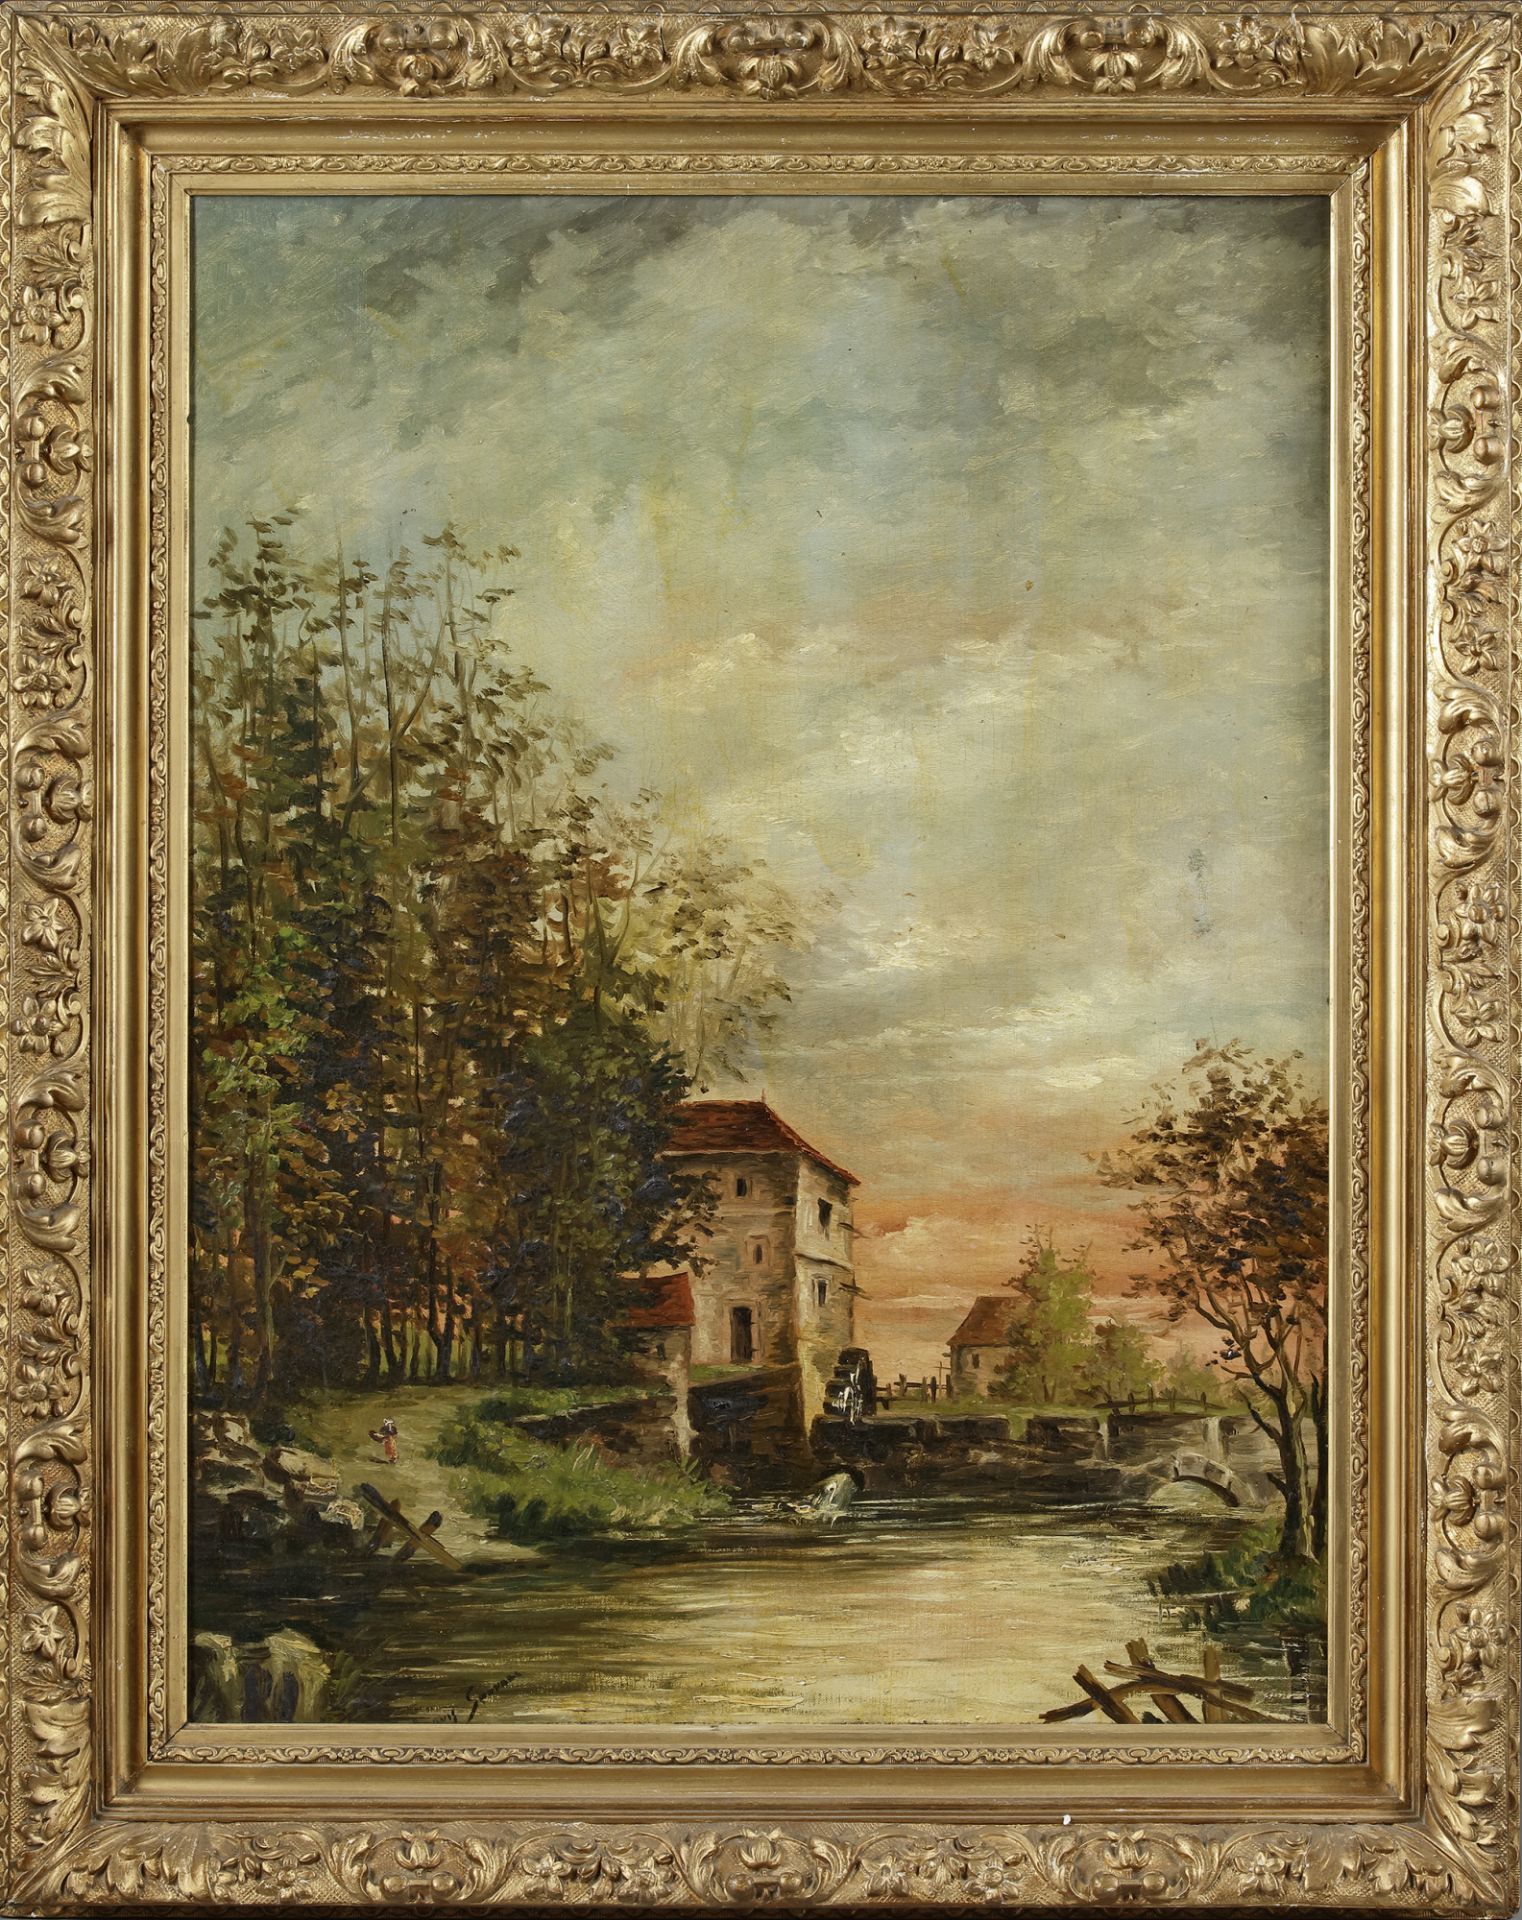 A PAIR OF FRENCH OIL PAINTINGS, LATE 19TH CENTURY - Image 2 of 3